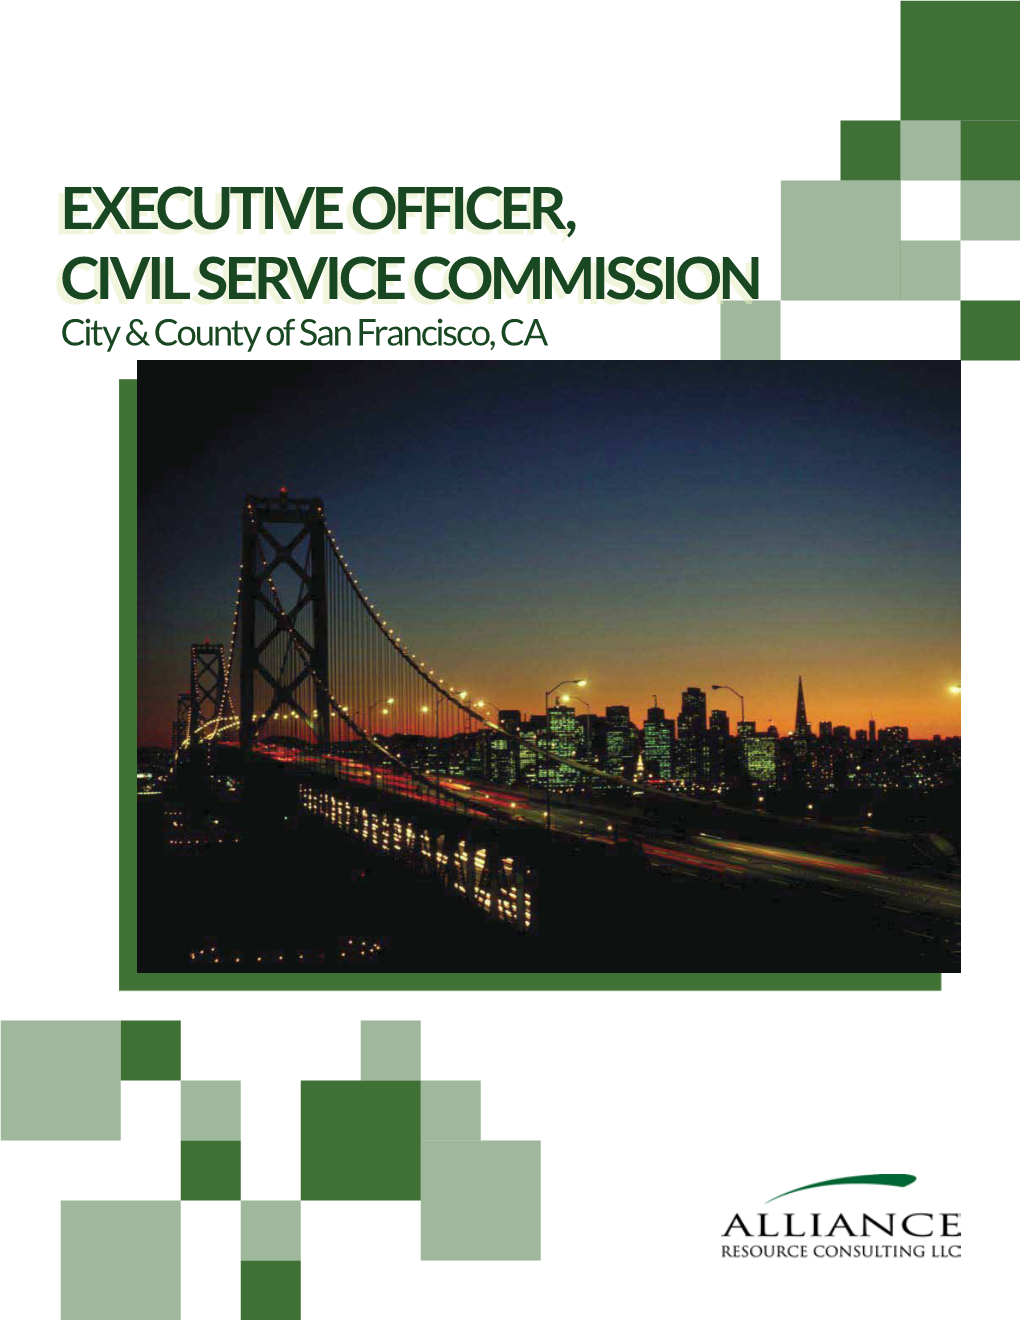 Executive Officer, Civil Service Commission